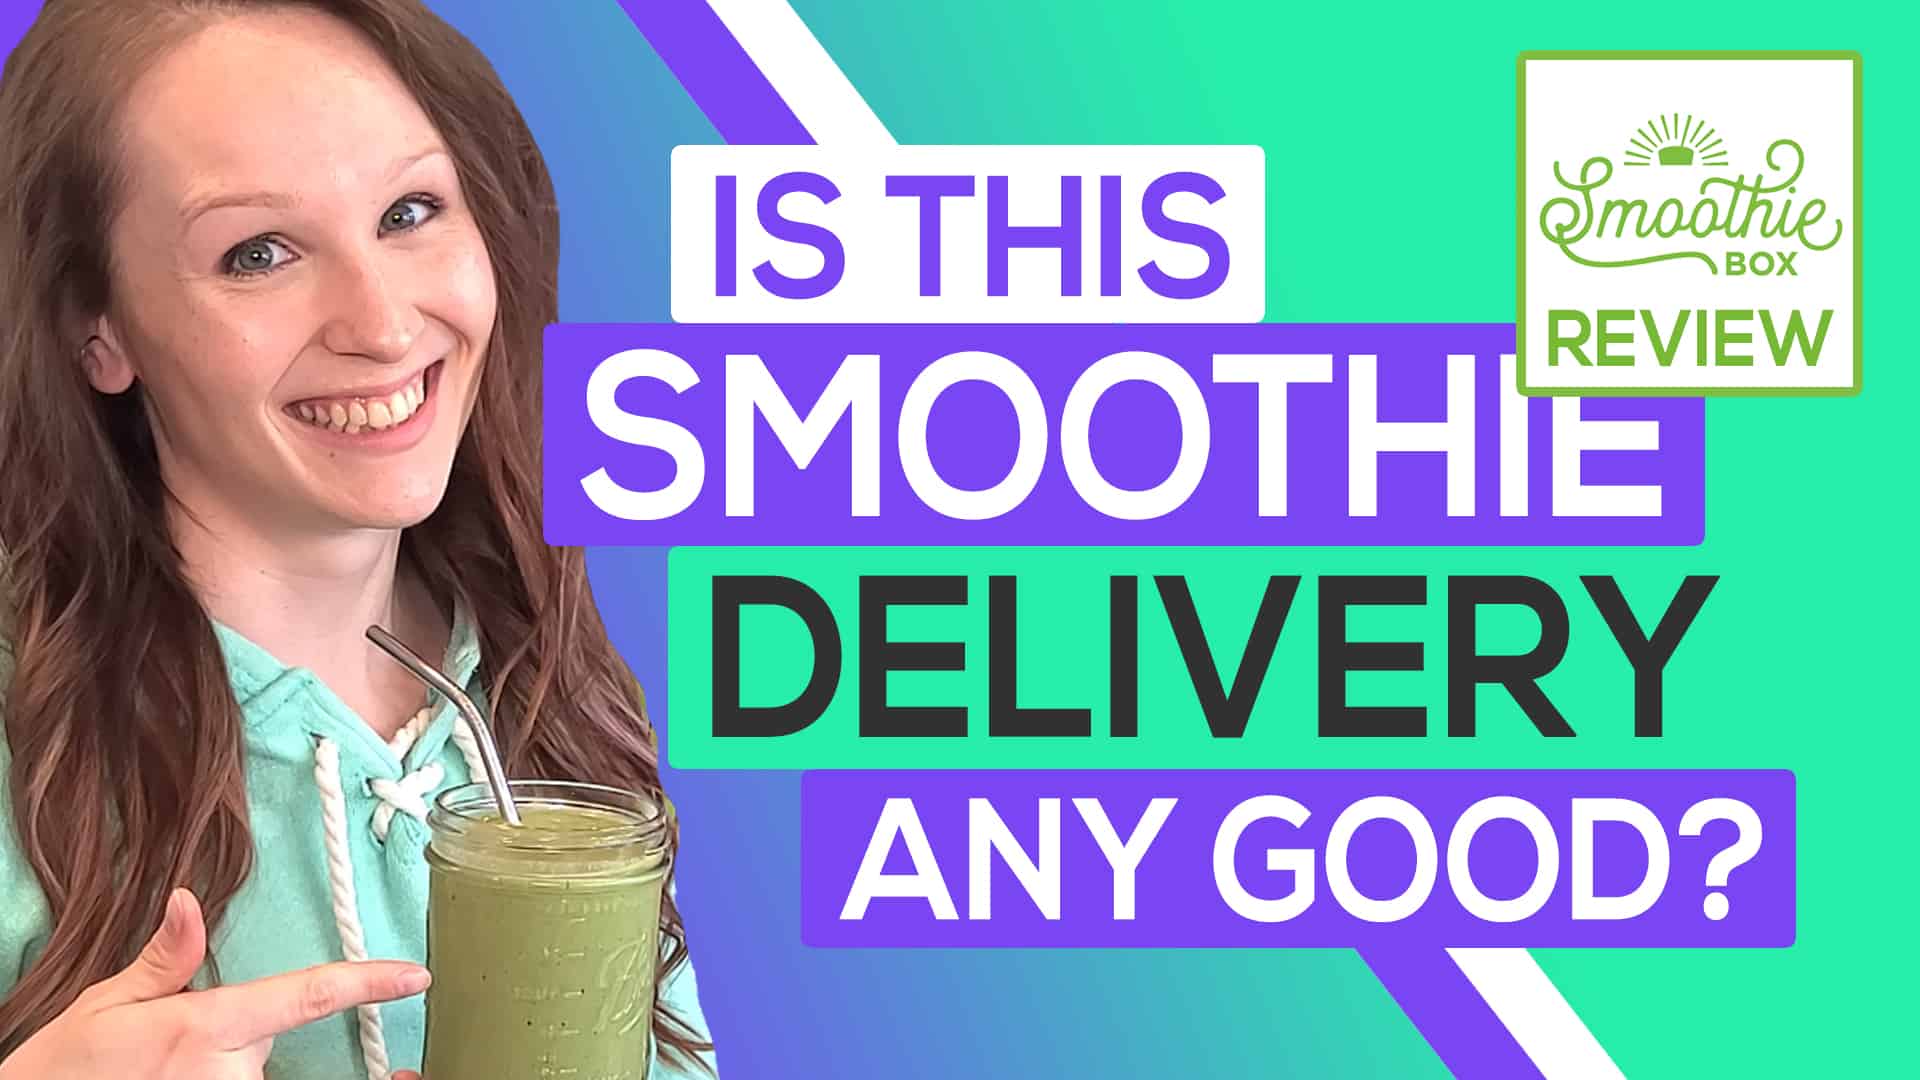 SmoothieBox Review Thumbnail